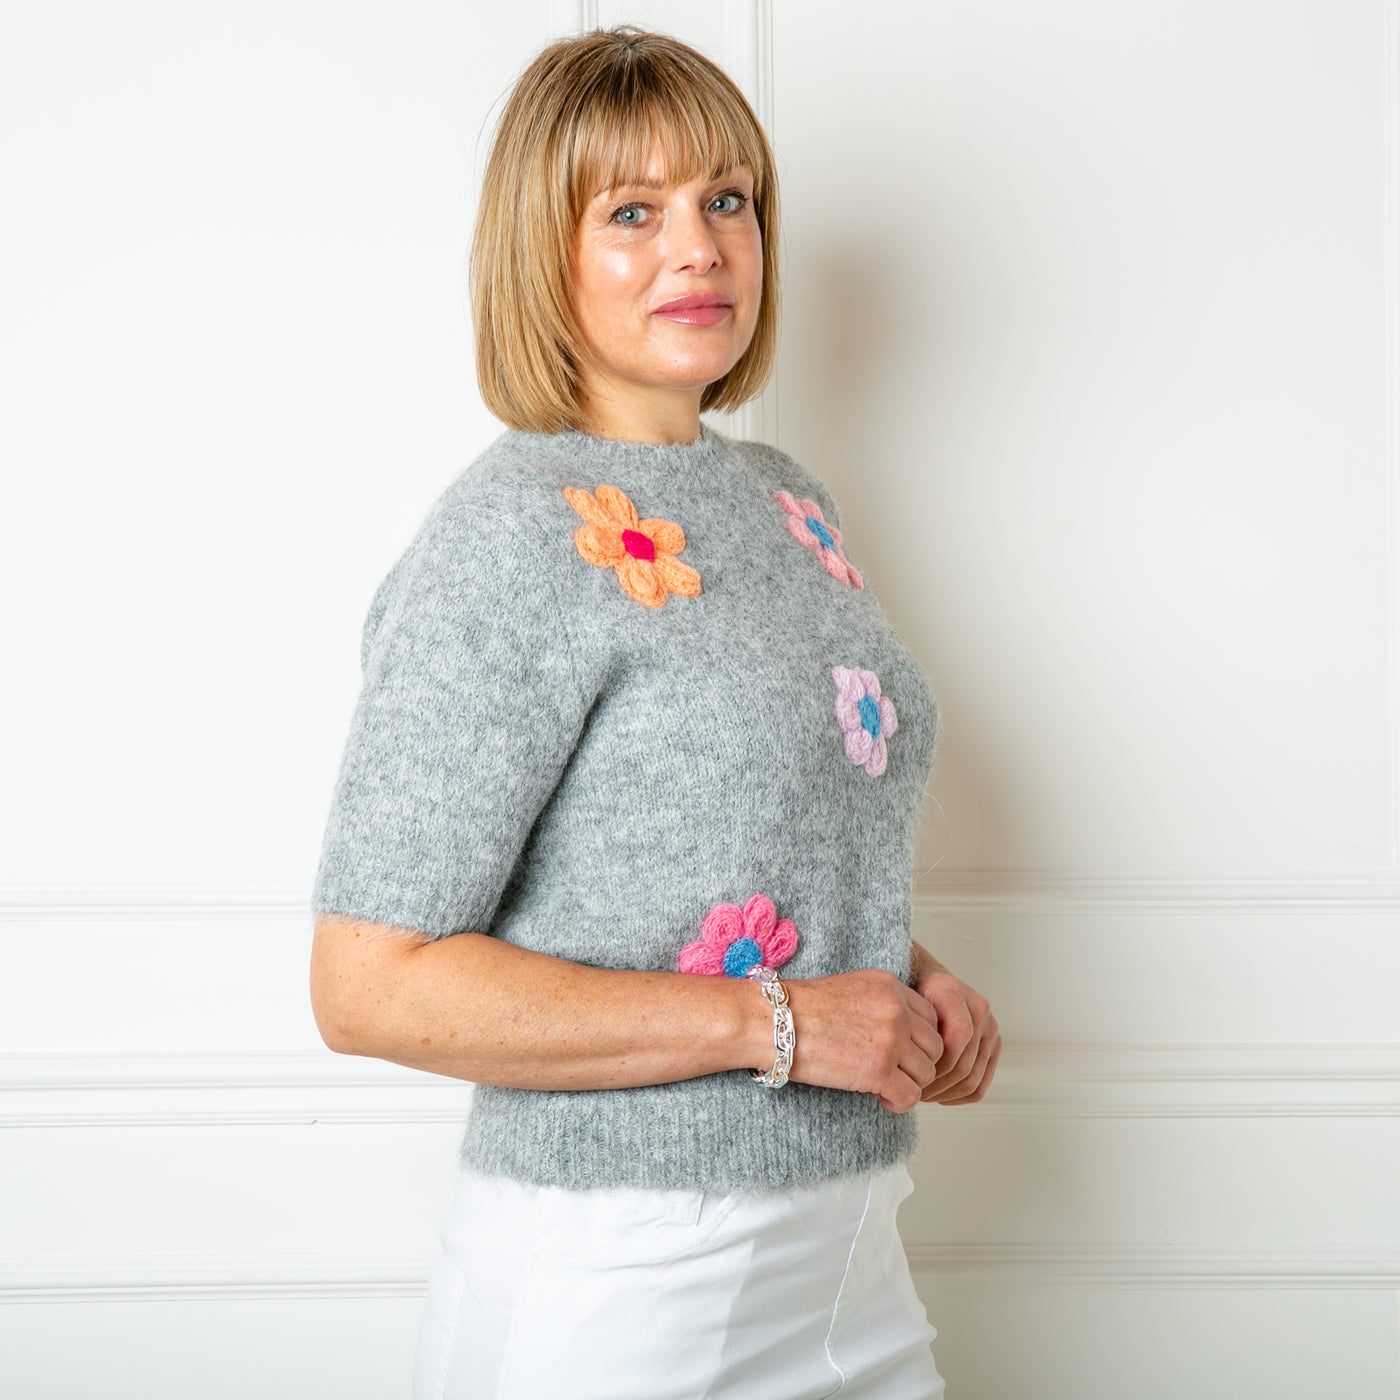 The grey Short Sleeve Daisy Jumper made from a blend of cotton and acrylic and perfect for spring